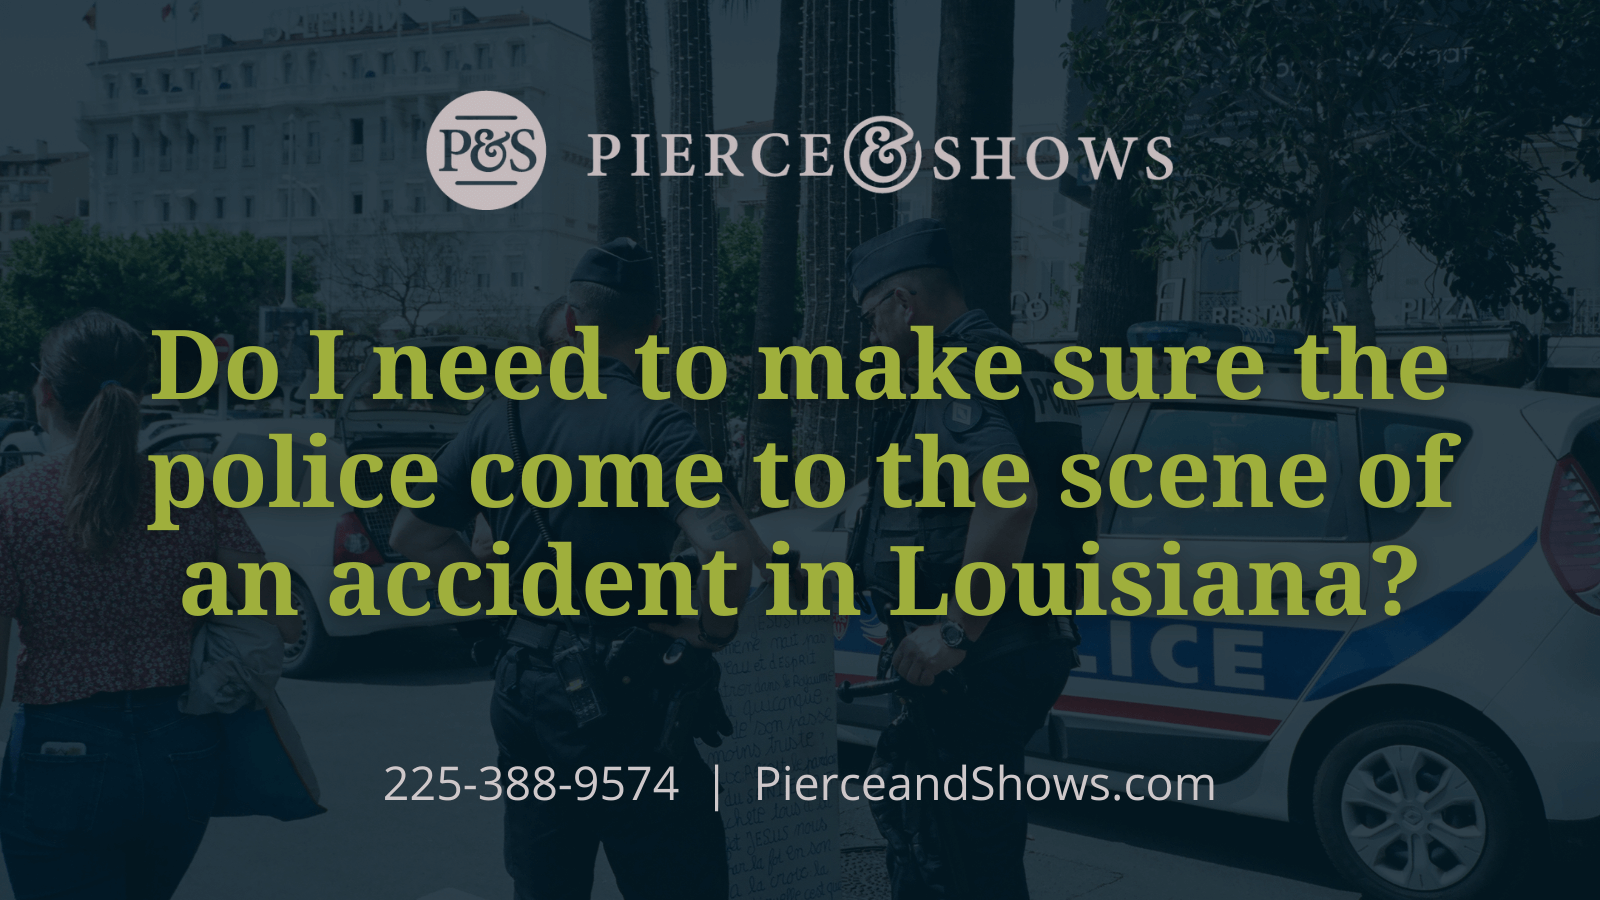 Do I need to make sure the police come to the scene of an accident in Louisiana - Baton Rouge Louisiana injury attorney Pierce & Shows (1)